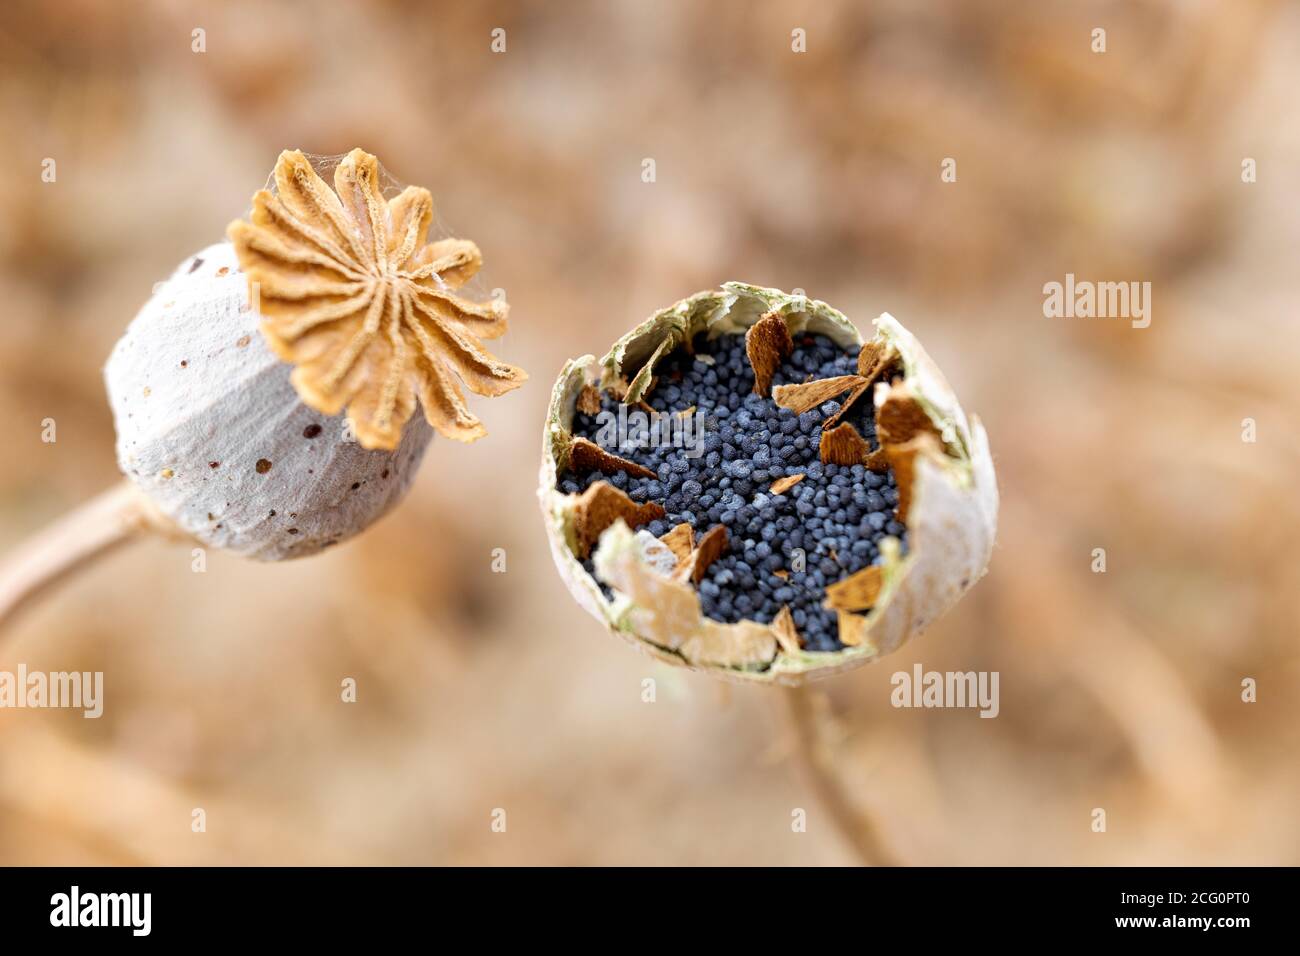 Macro detail of the poppy seeds inside the plant without collecting yet. Stock Photo